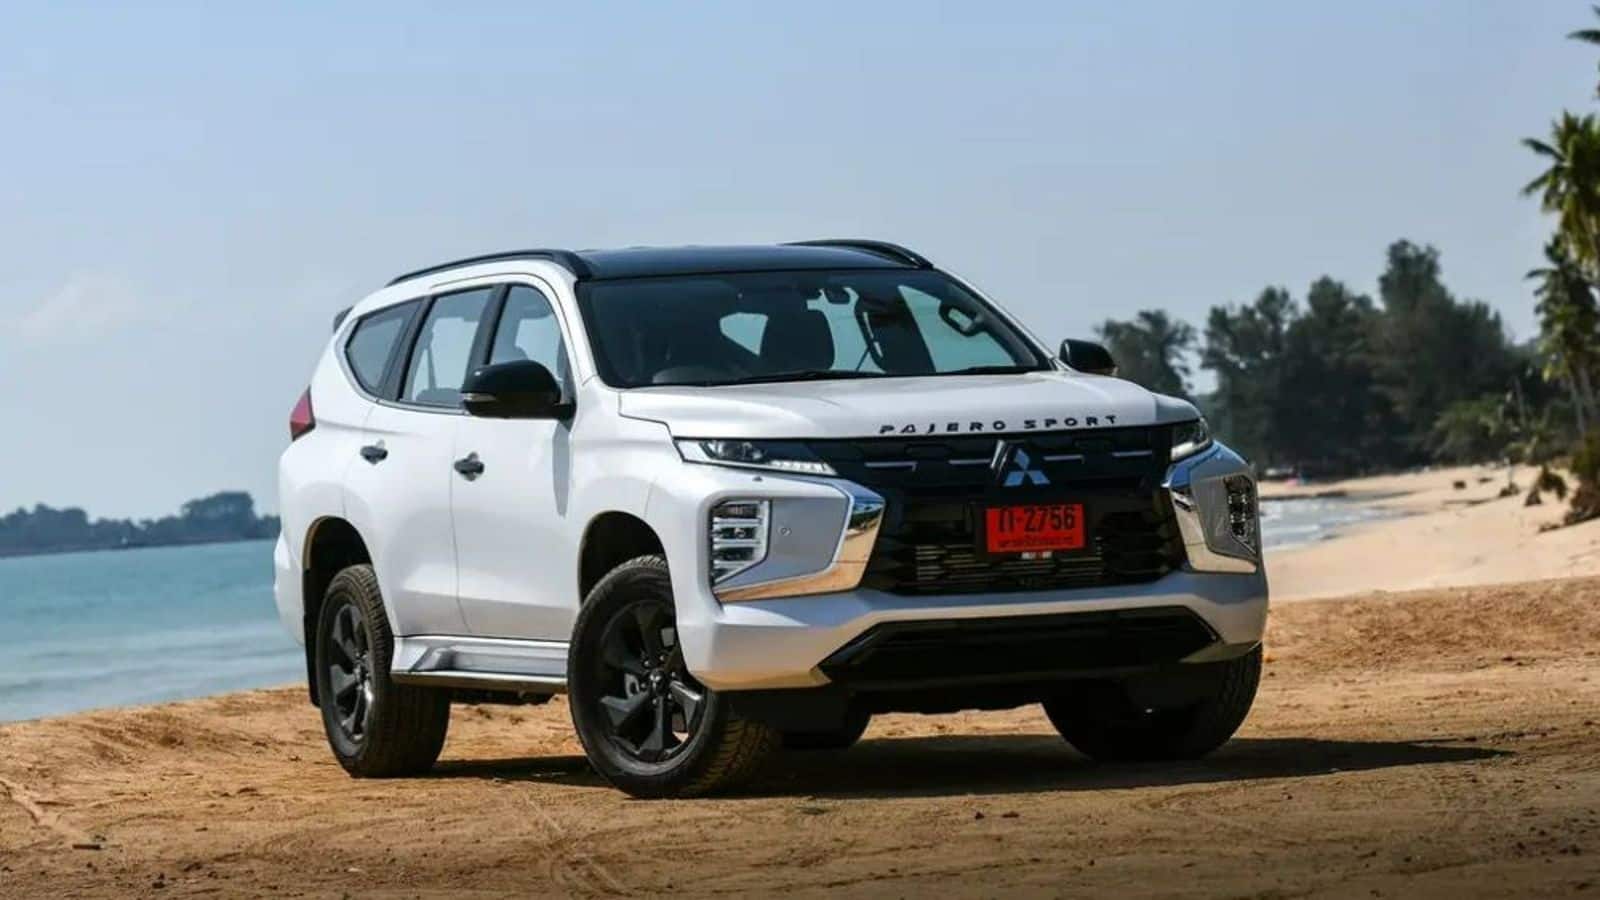 Mitsubishi Motors reveals Pajero Sport (facelift) globally: Check features